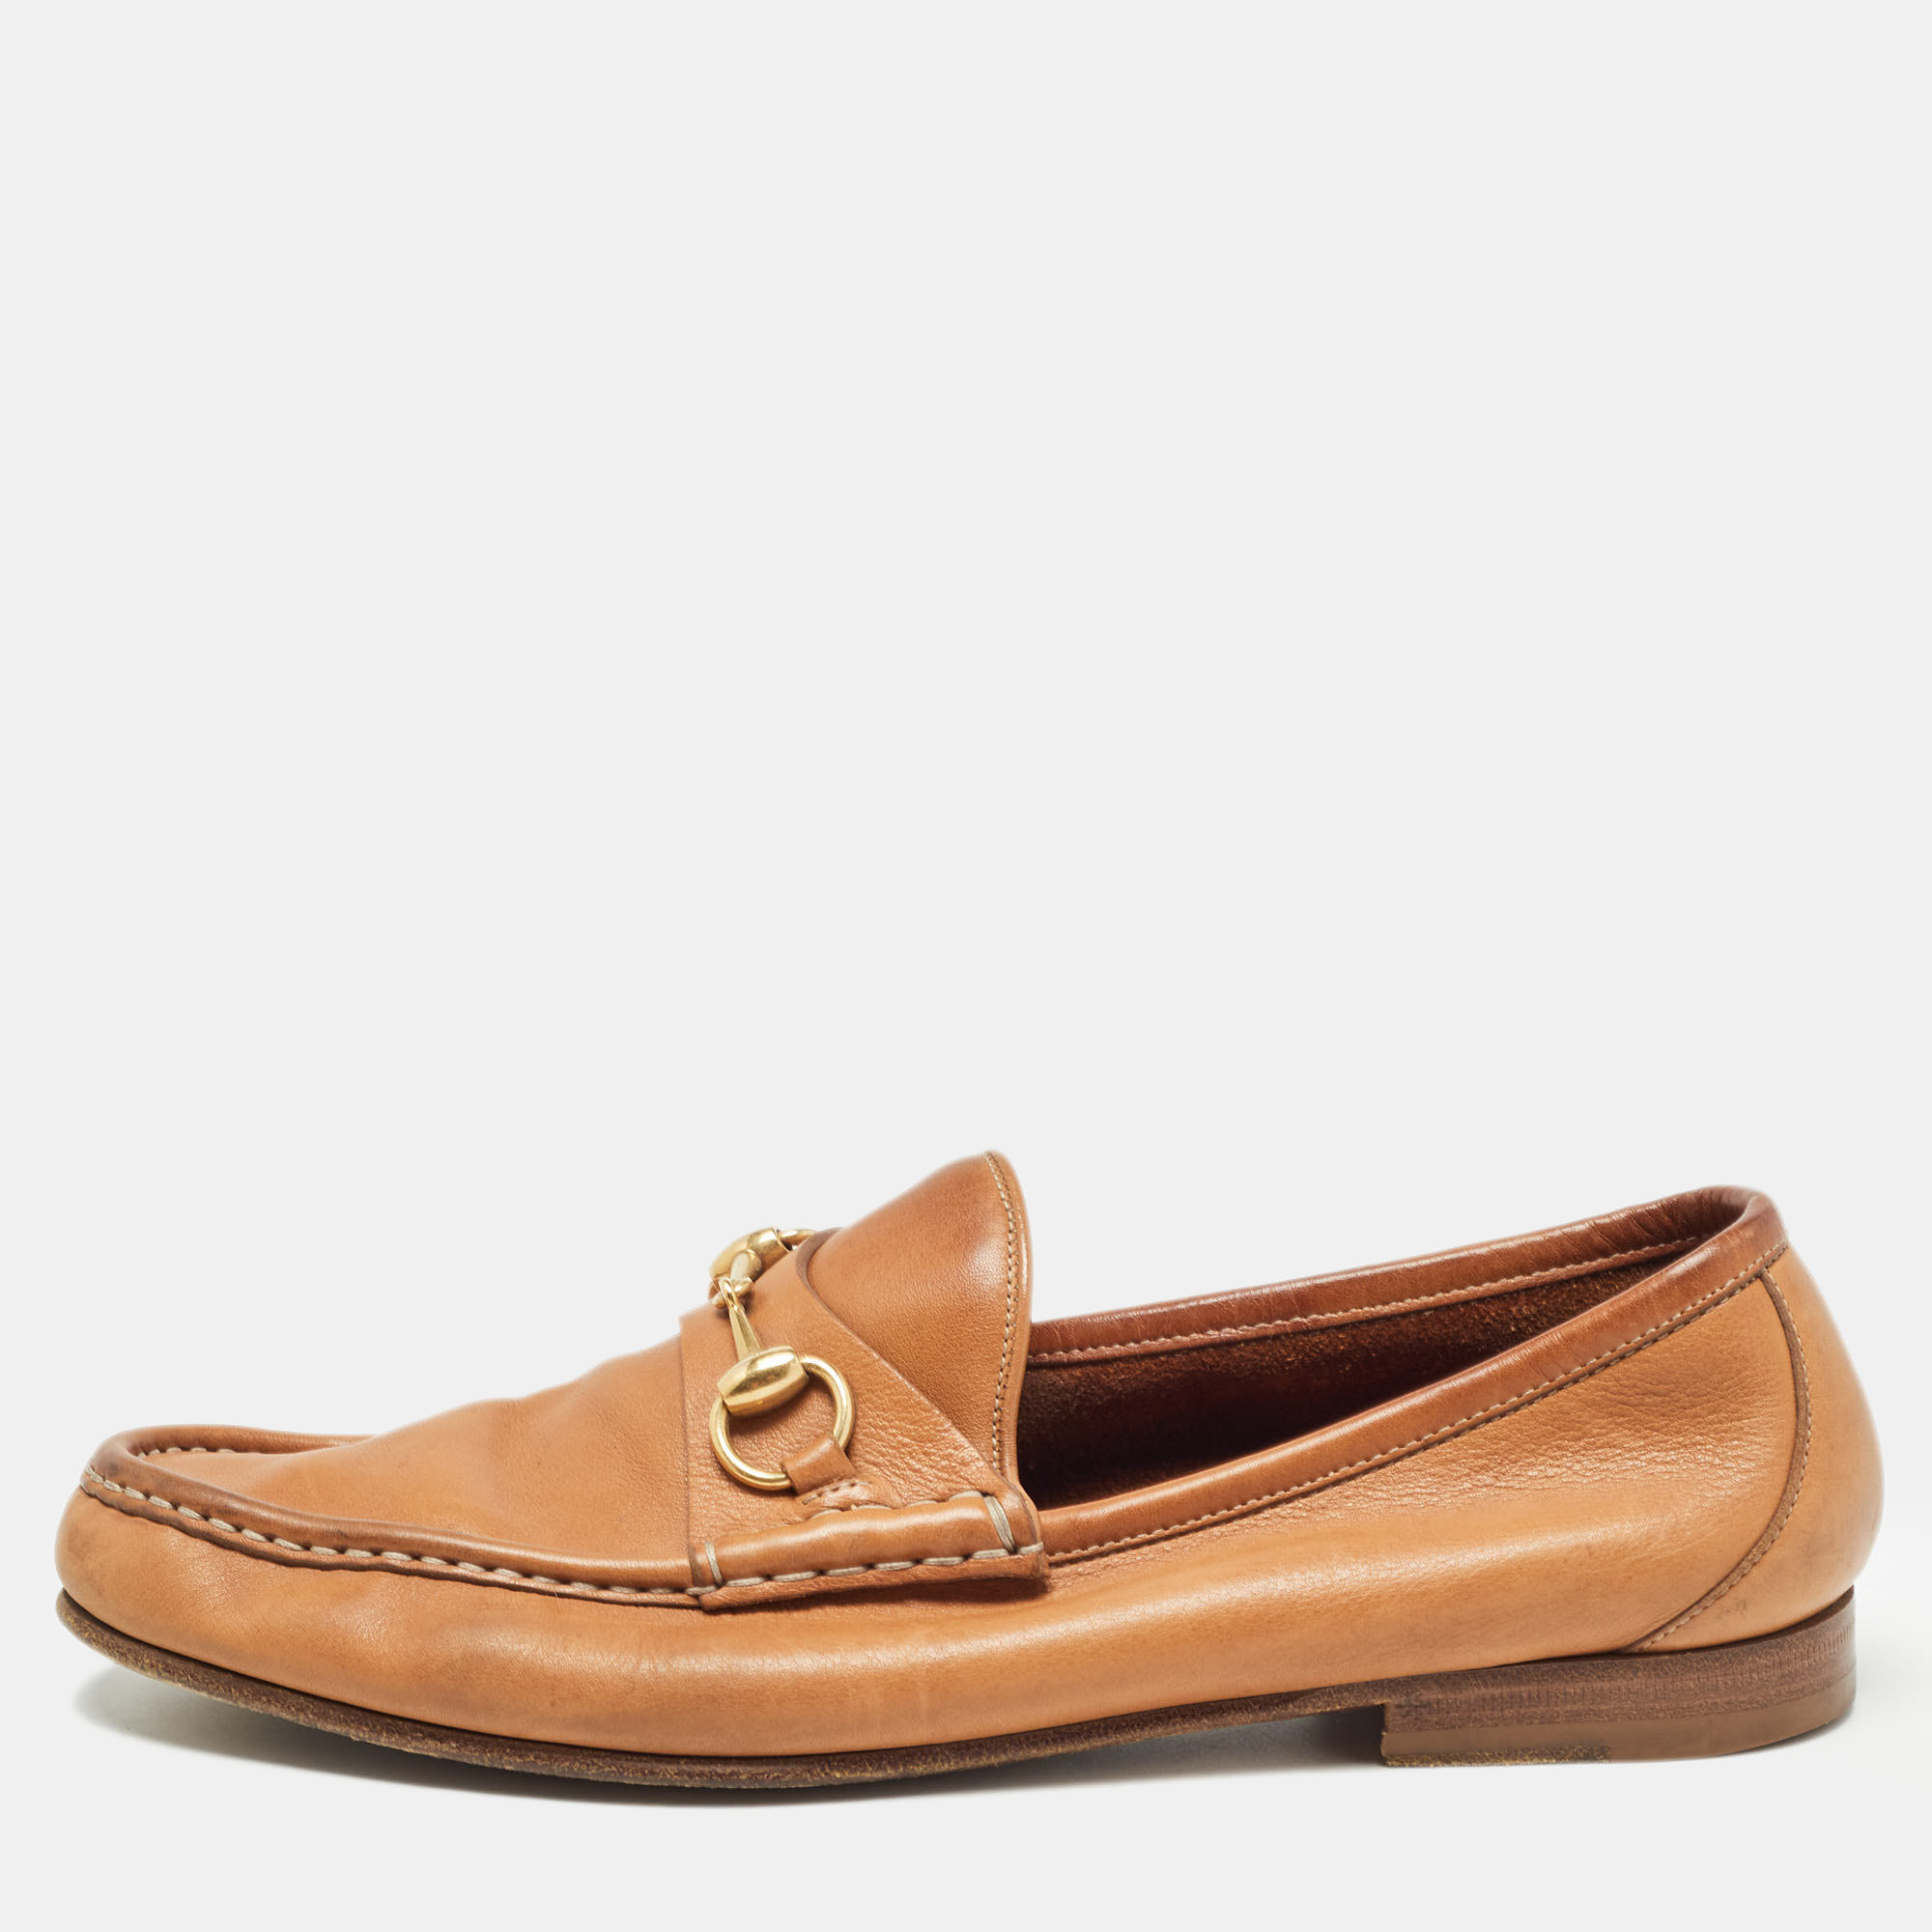 Gucci tan leather horsebit loafers size 42